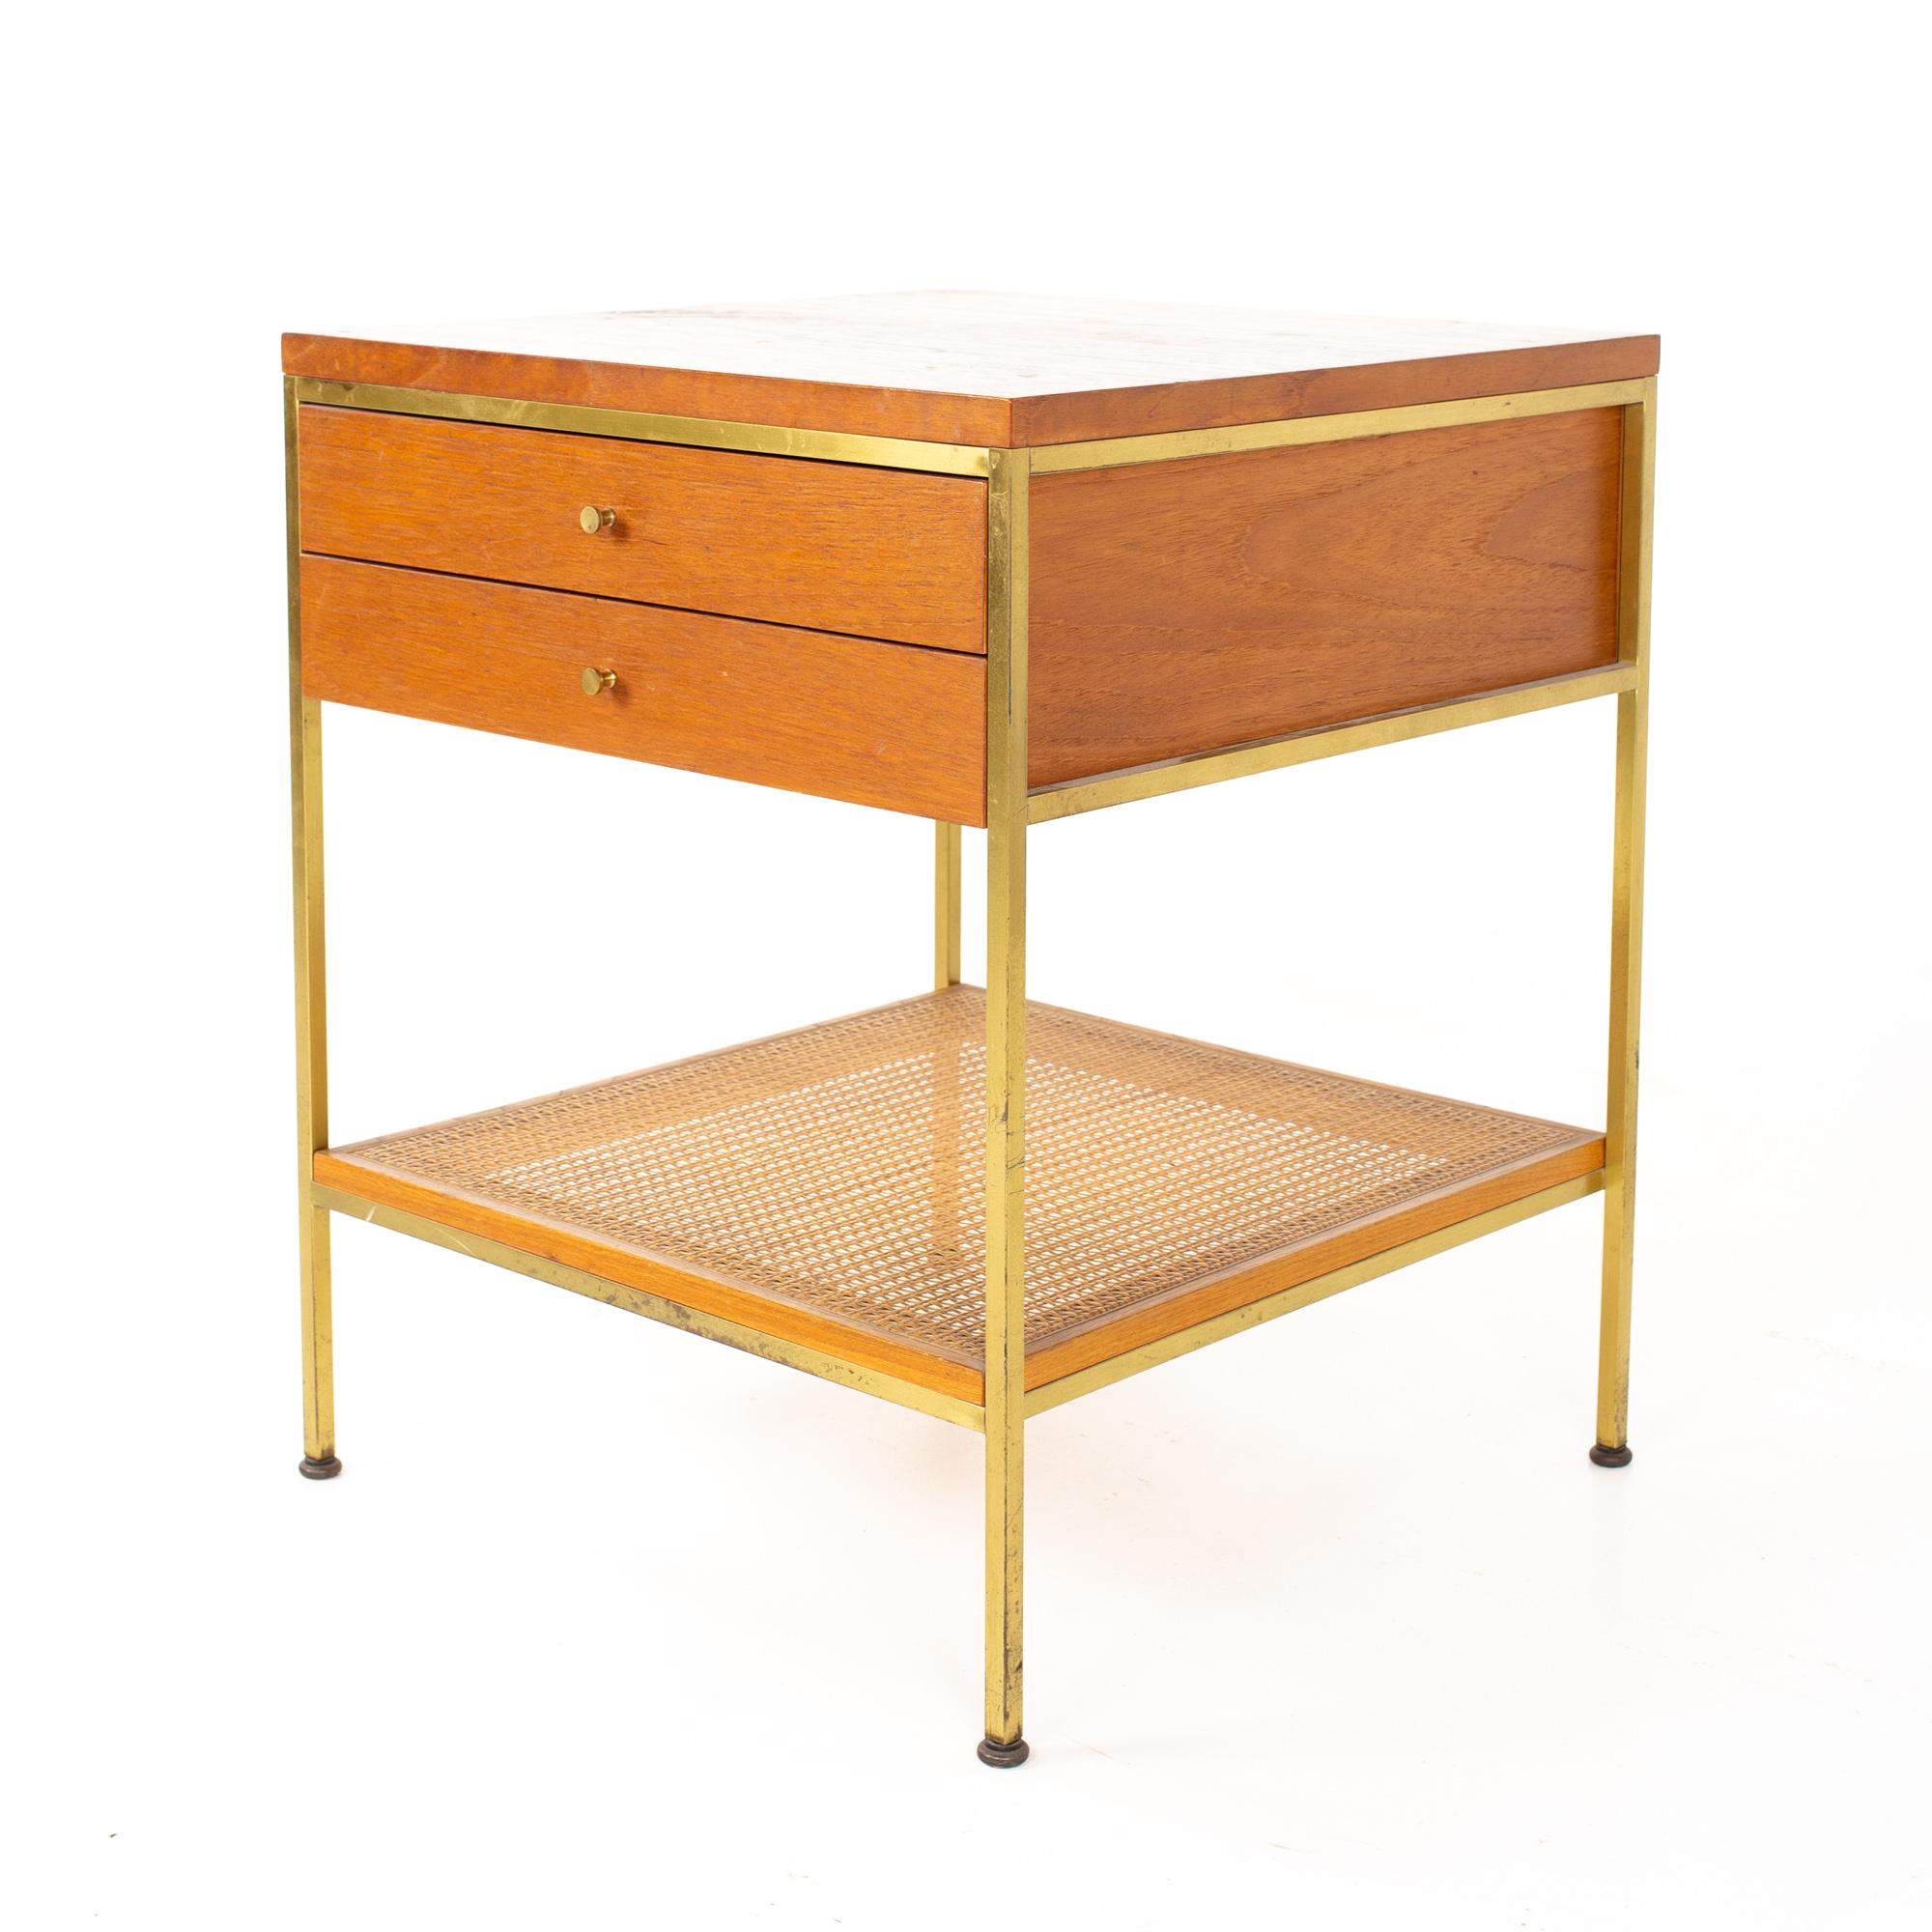 Paul McCobb for Calvin Group mid century oak and brass nightstand
Nightstand measures: 20 wide x 20 deep 24.25 inches high

All pieces of furniture can be had in what we call restored vintage condition. That means the piece is restored upon